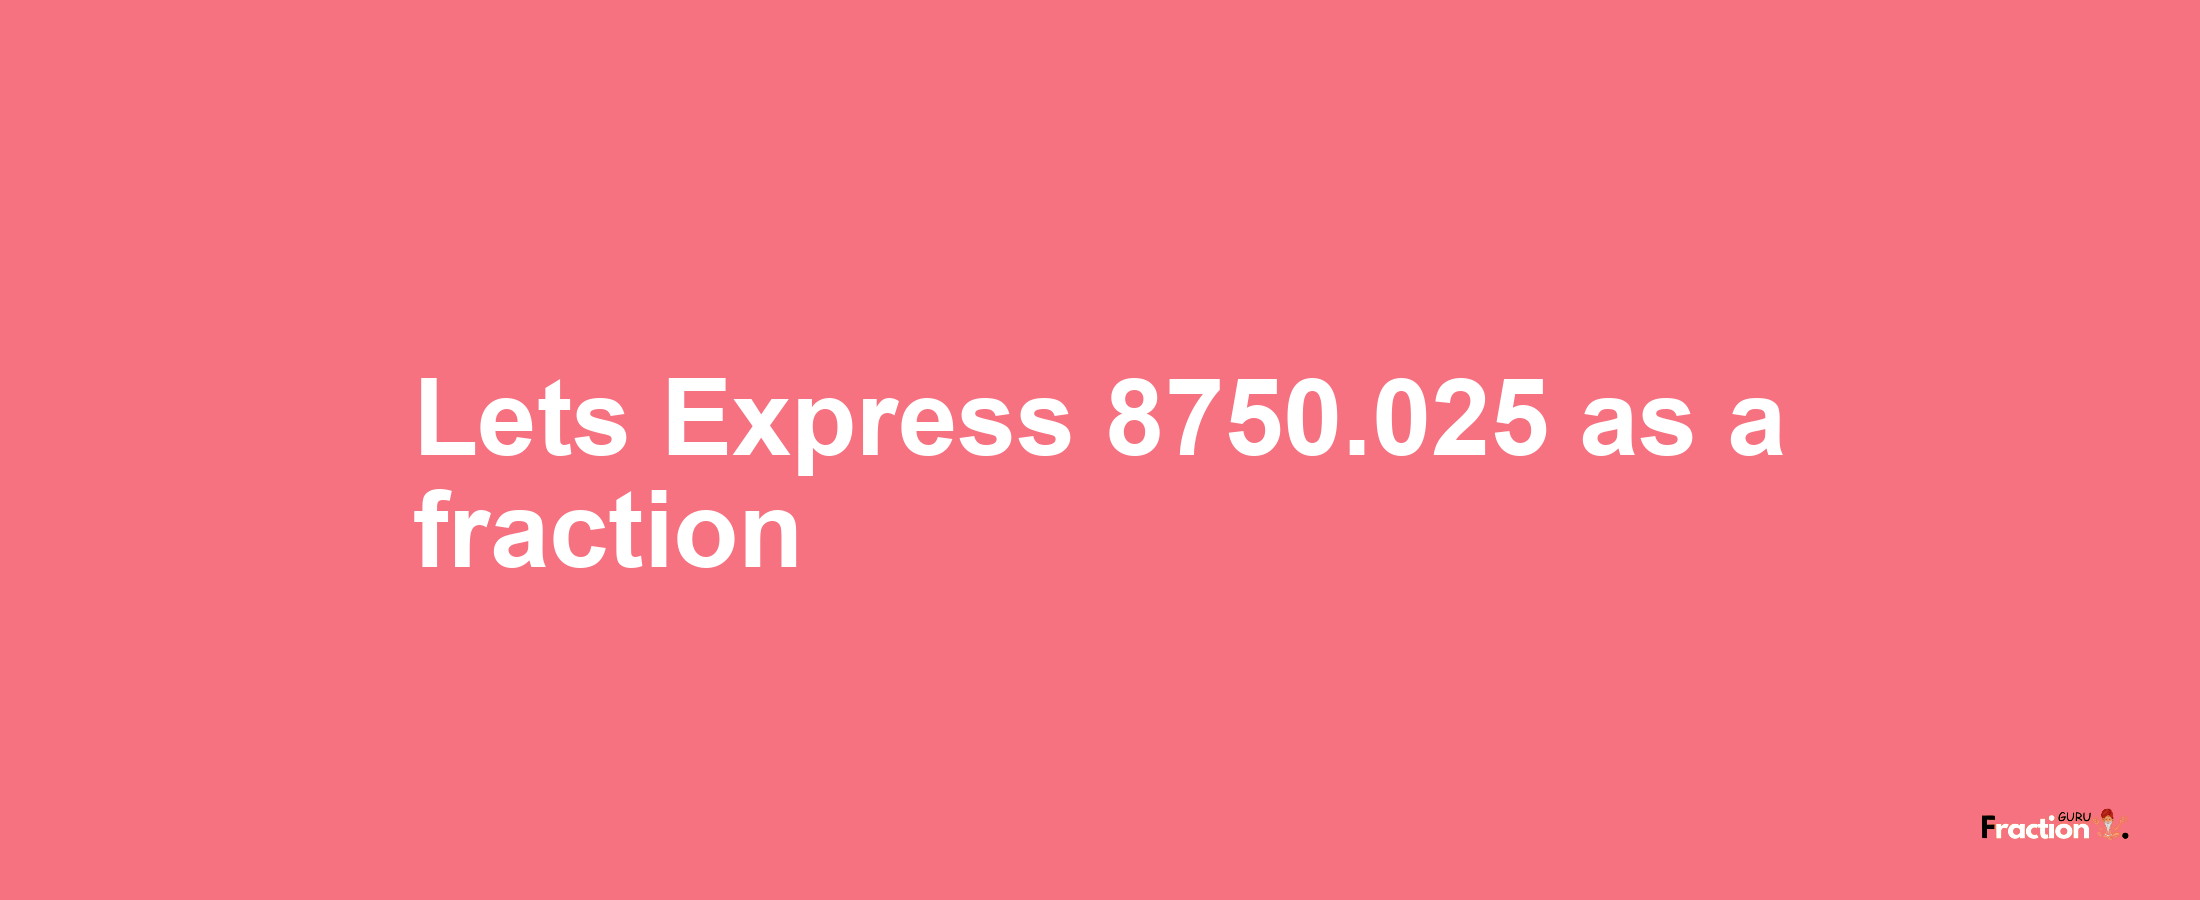 Lets Express 8750.025 as afraction